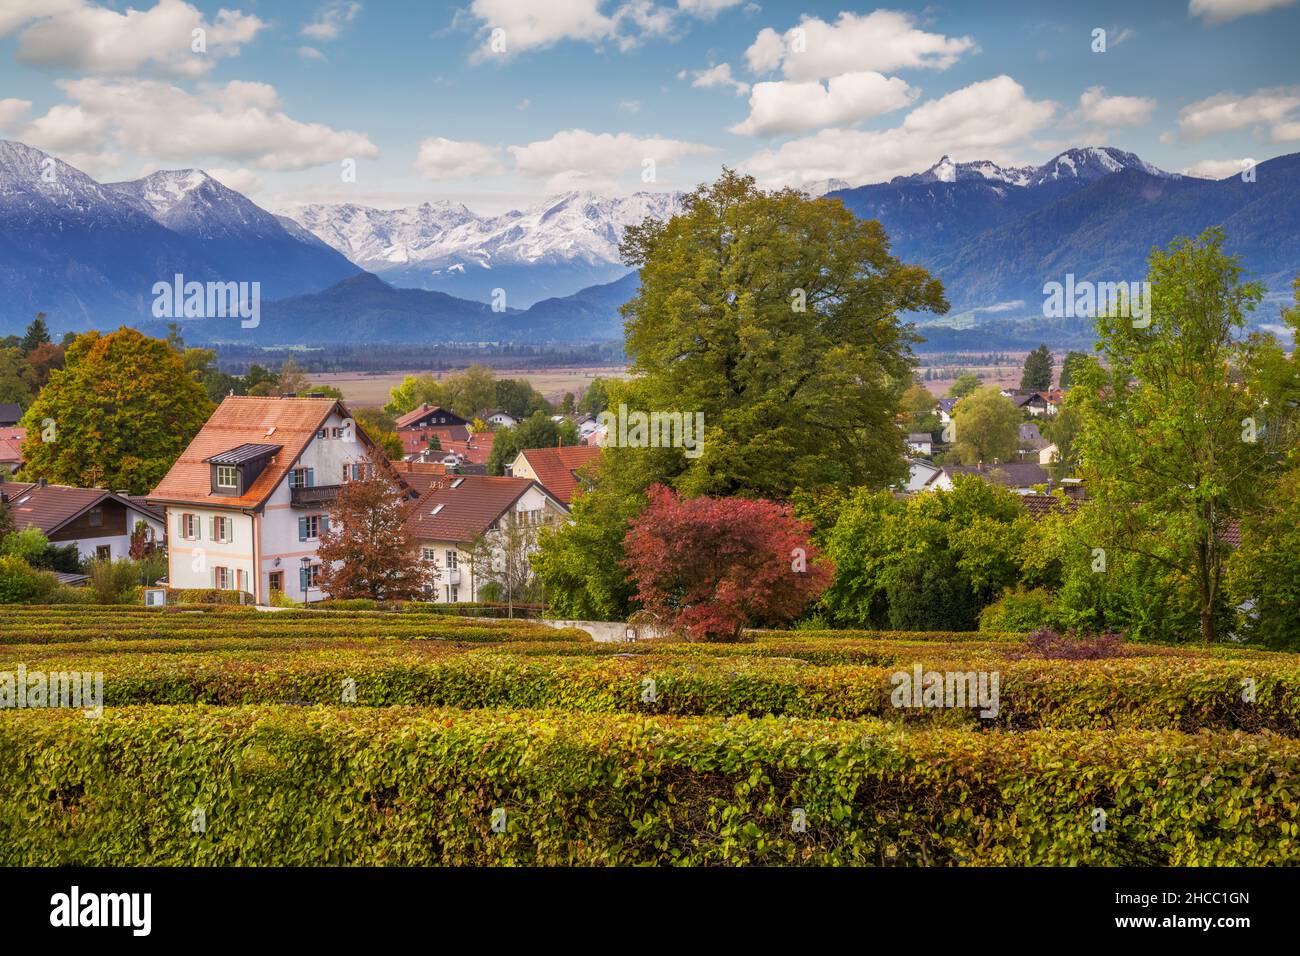 Town of Murnau in the alps of Bavaria (Germany) Stock Photo